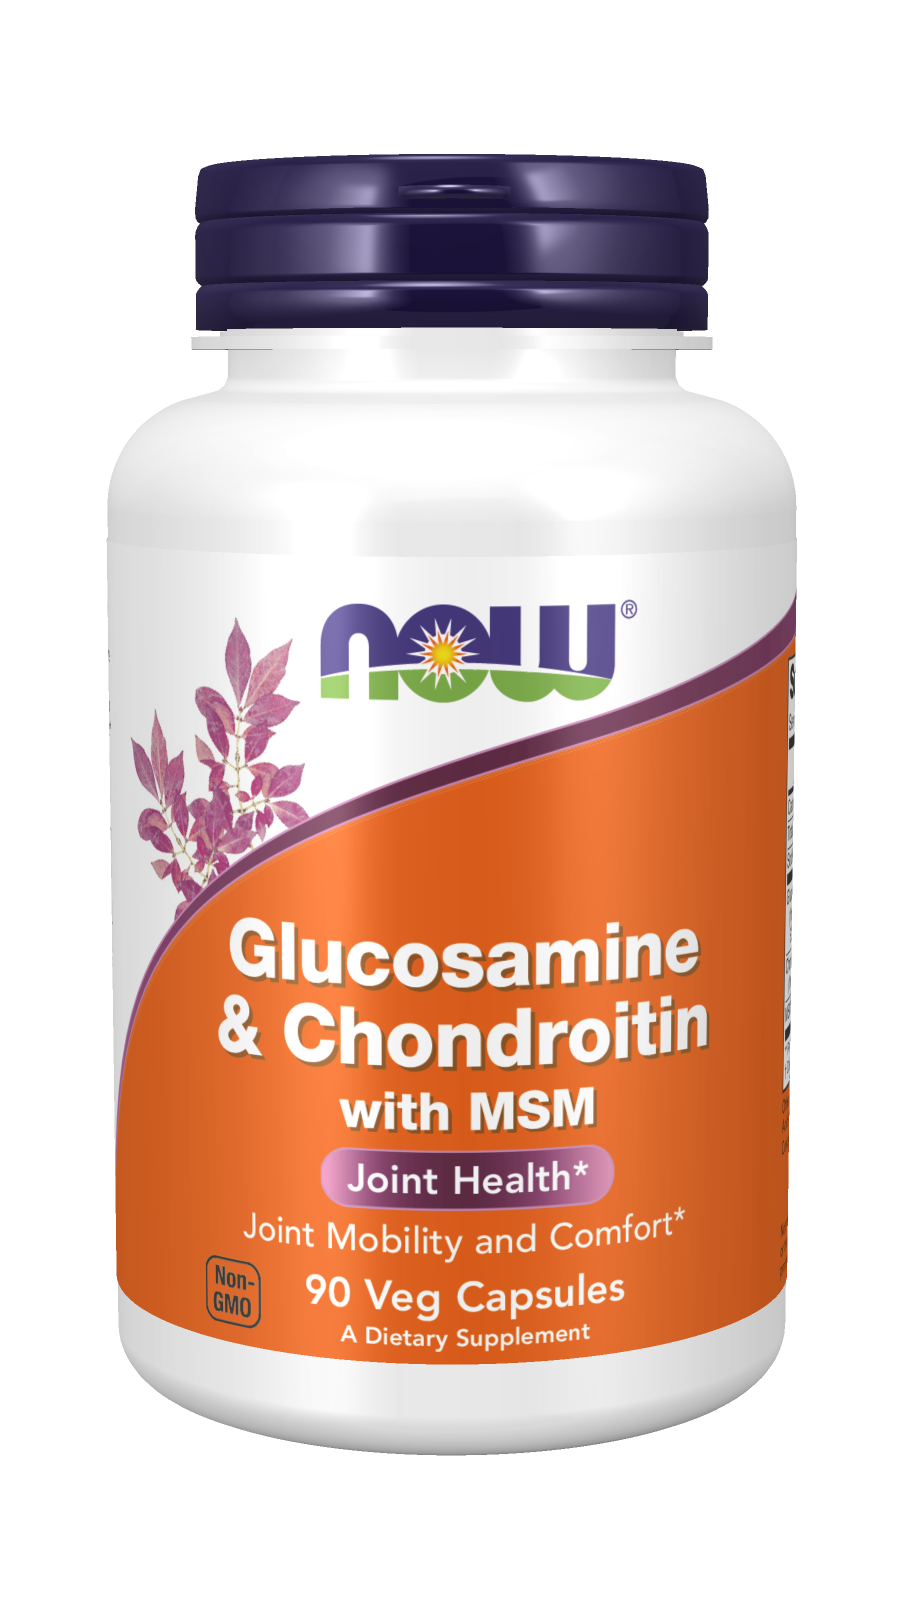 Glucosamine & Chondroitin with MSM - 90 Veg Capsules Bottle Front